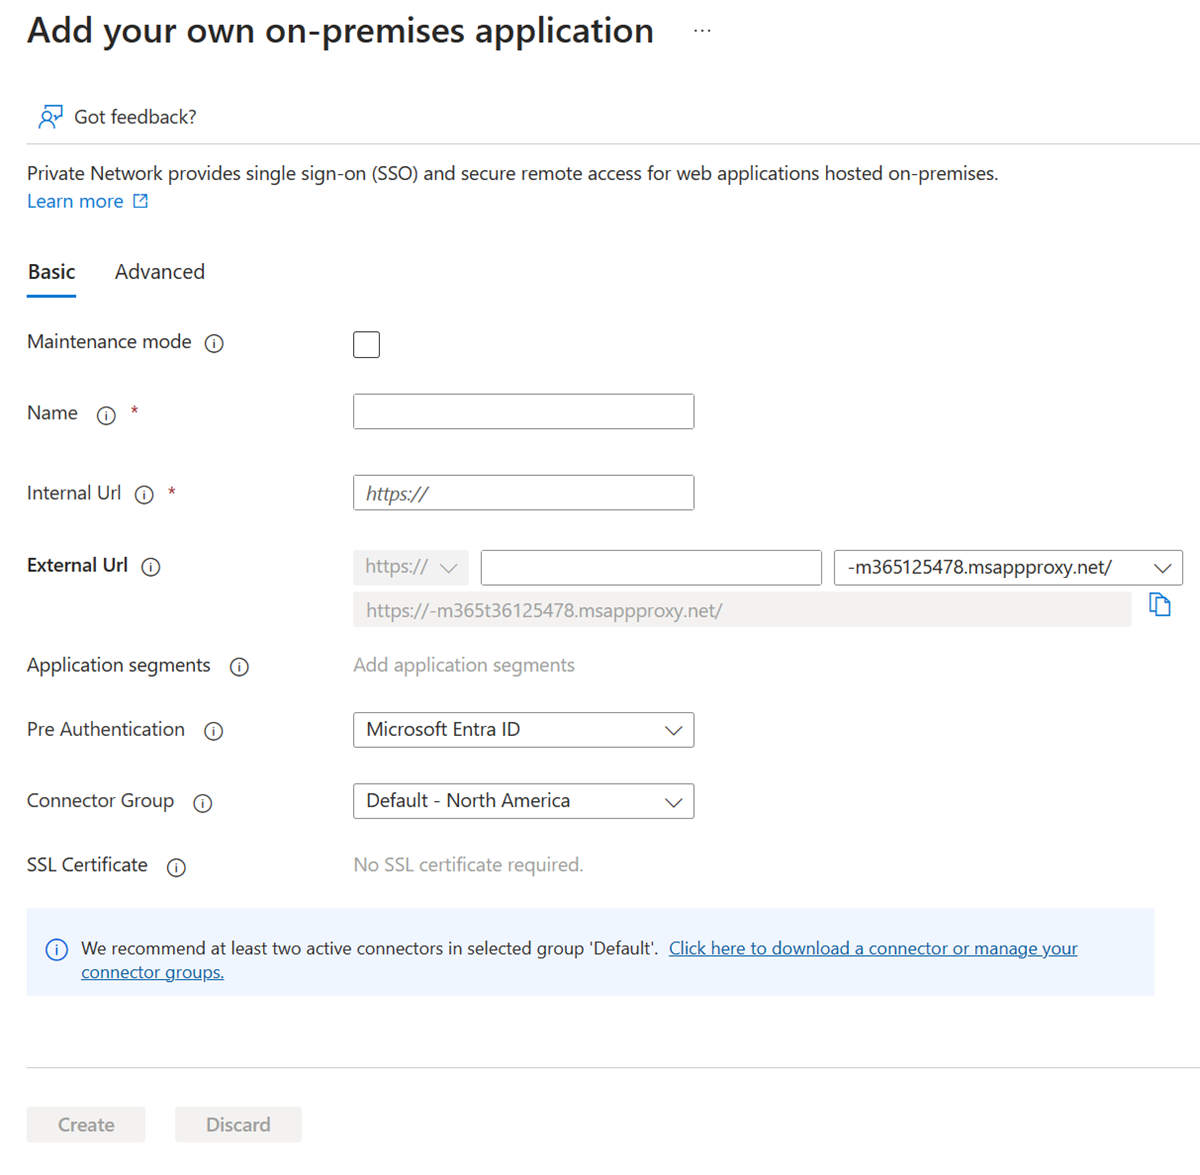 Add your own on-premises application